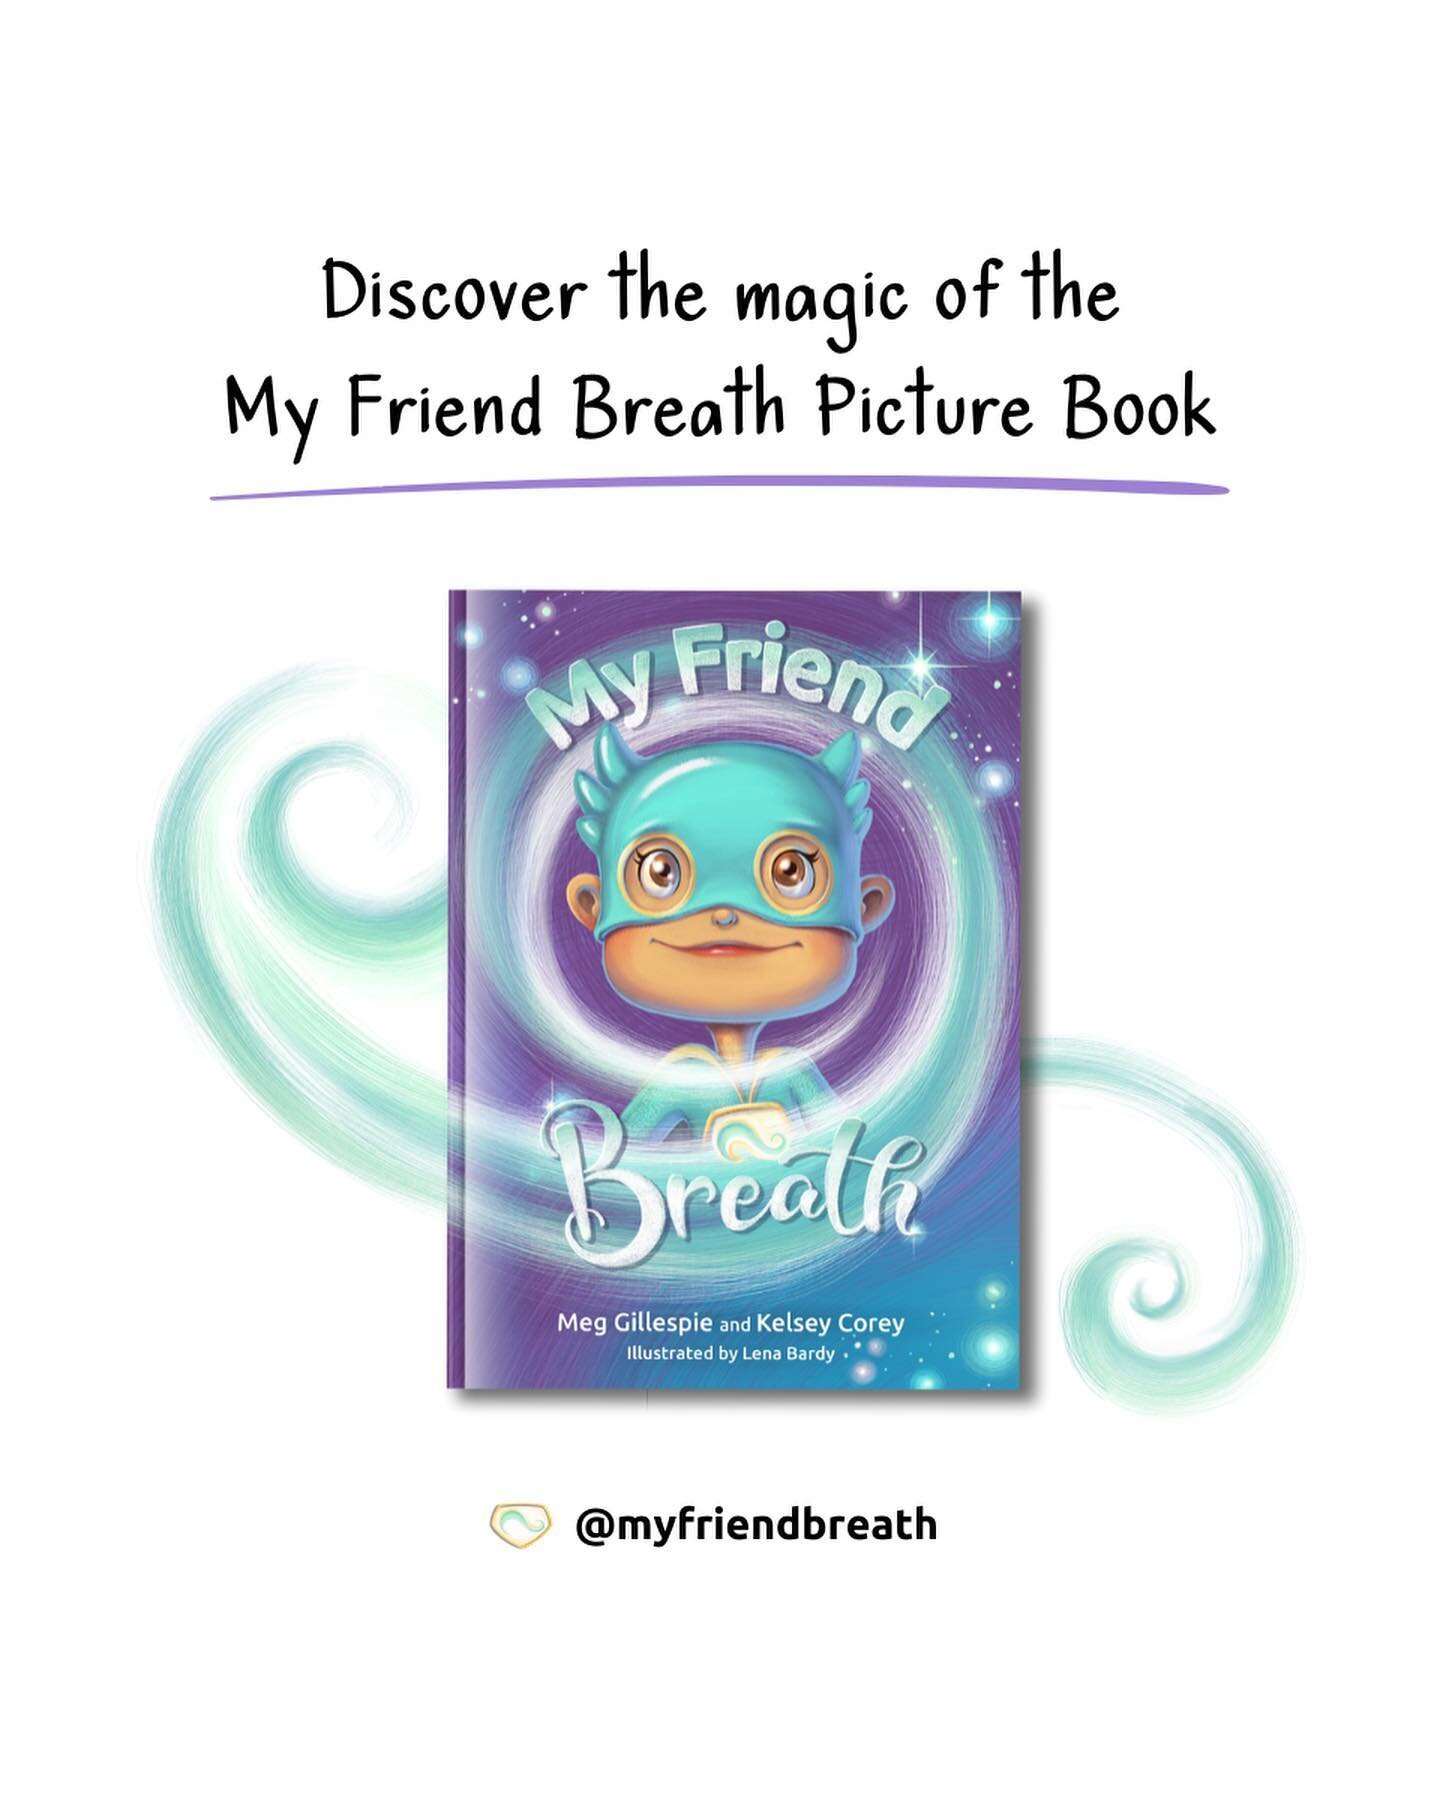 💨Change your Breath, Change your Emotion 😌

This beautifully illustrated picture book teaches children how to use mindful breathing to regulate their emotions and develop their resilience.

Using a simple strategy, children are empowered with the w